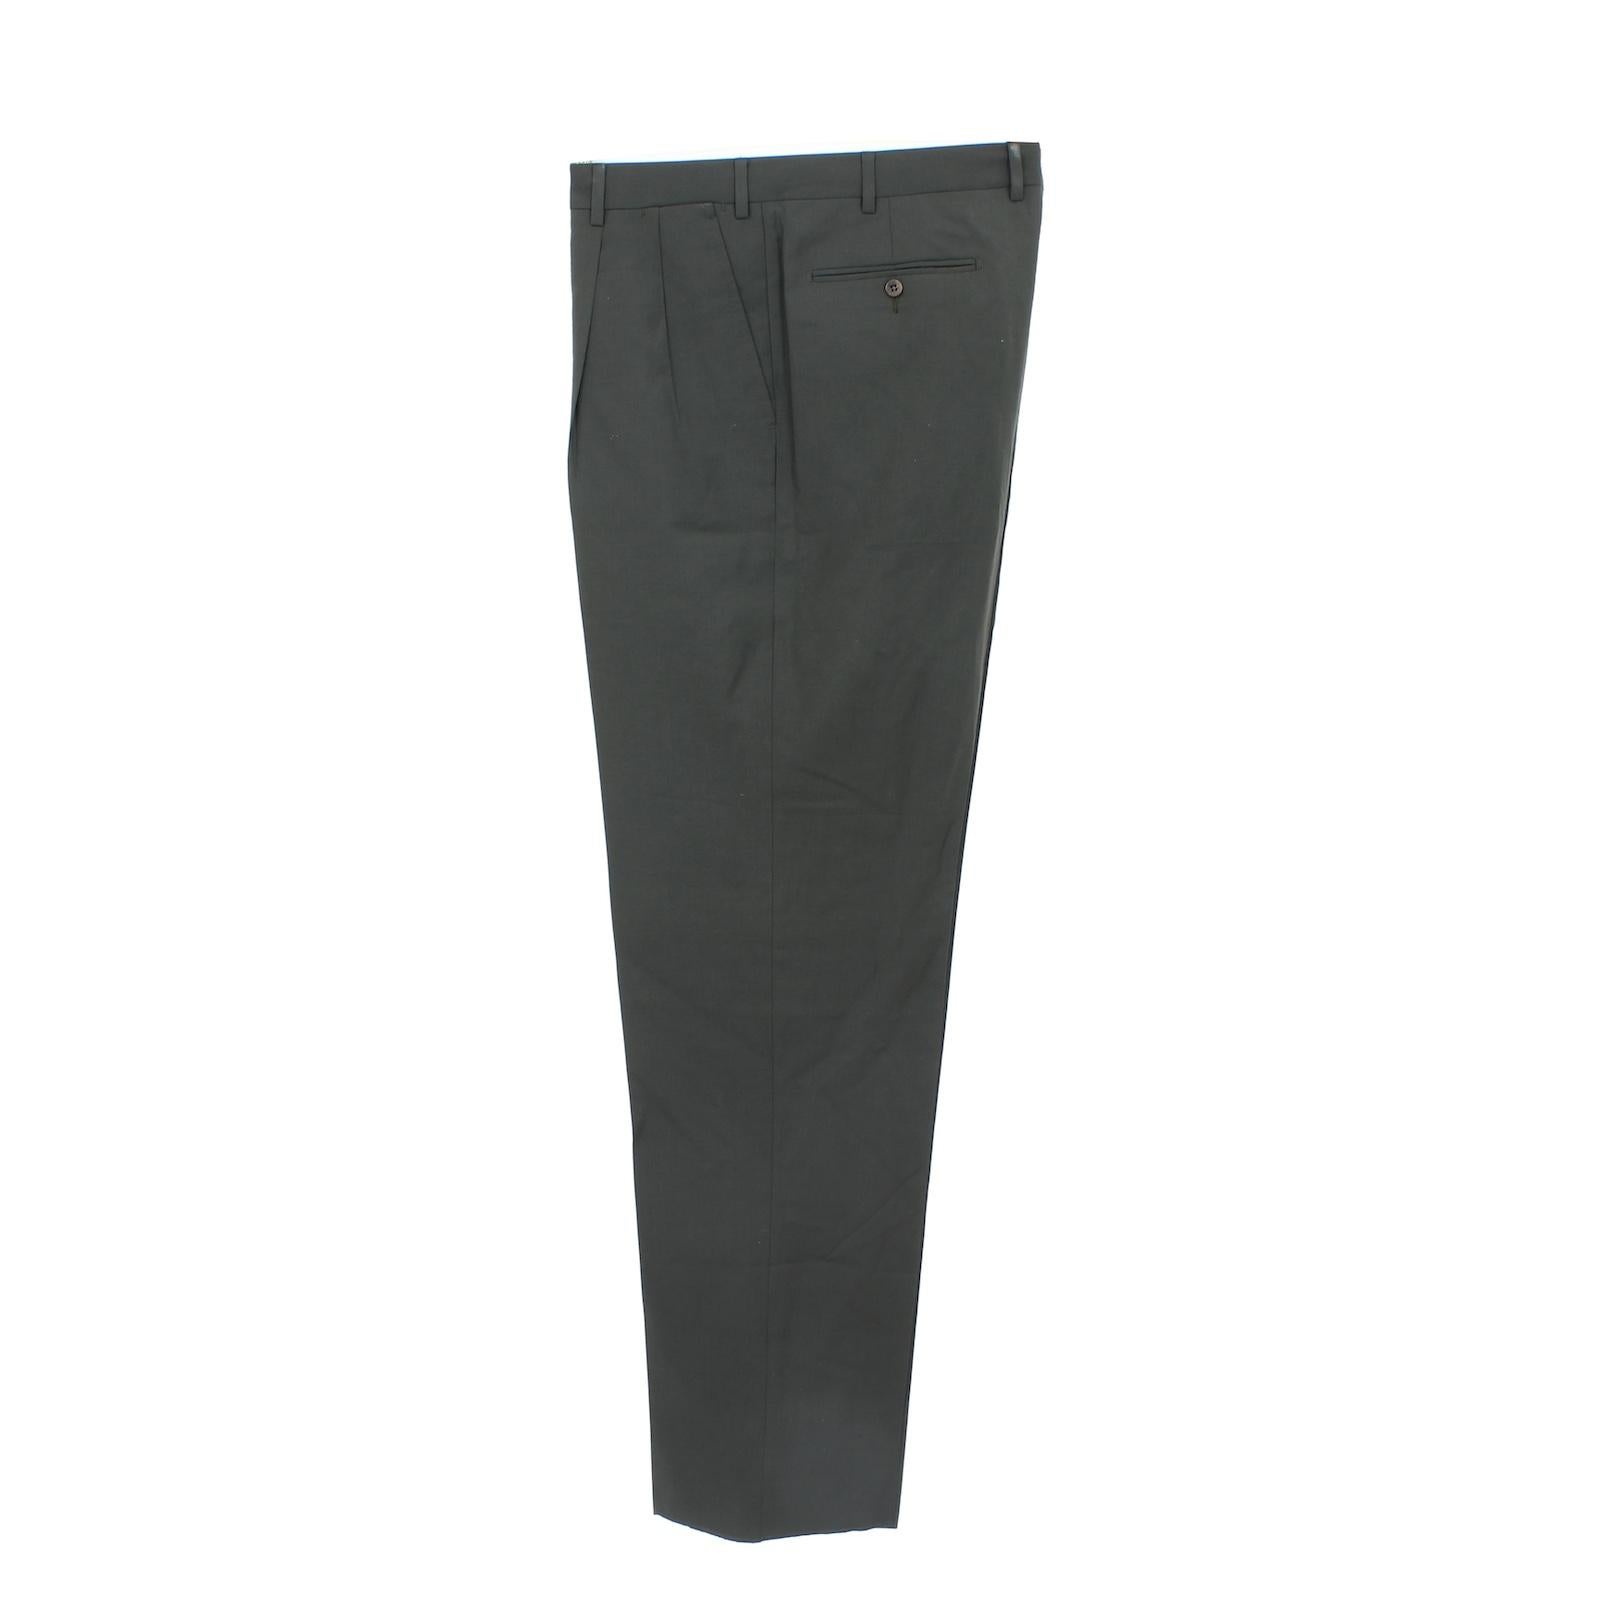 Burberry vintage 90s trousers. Classic model, green color, 100% wool fabric. Made in italy. New from warehouse stock.

Size: 58 It 48 Us 48 Uk

Waist: 50 cm
Length: 127 cm
Hem: 24 cm
Inseam length: 97 cm